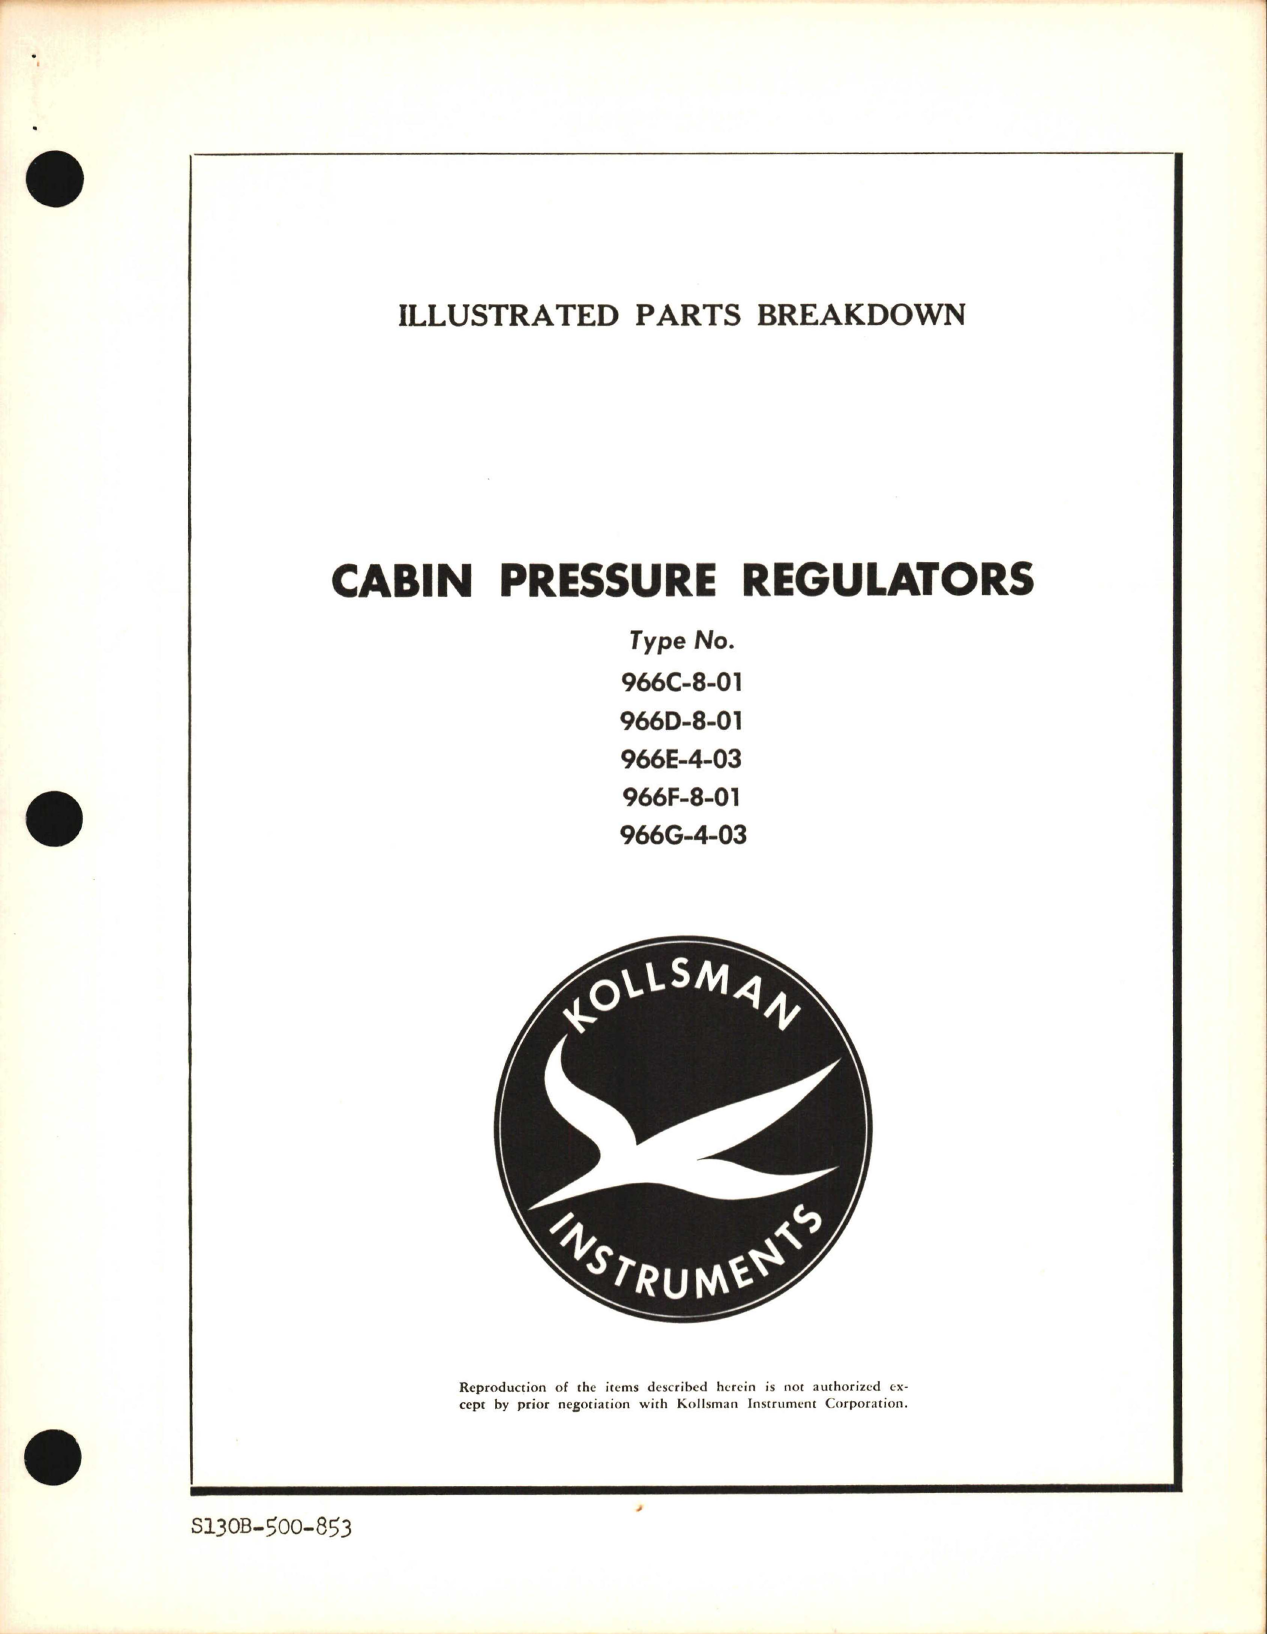 Sample page 1 from AirCorps Library document: Illustrated Parts Breakdown for Kollsman Cabin Pressure Regulators